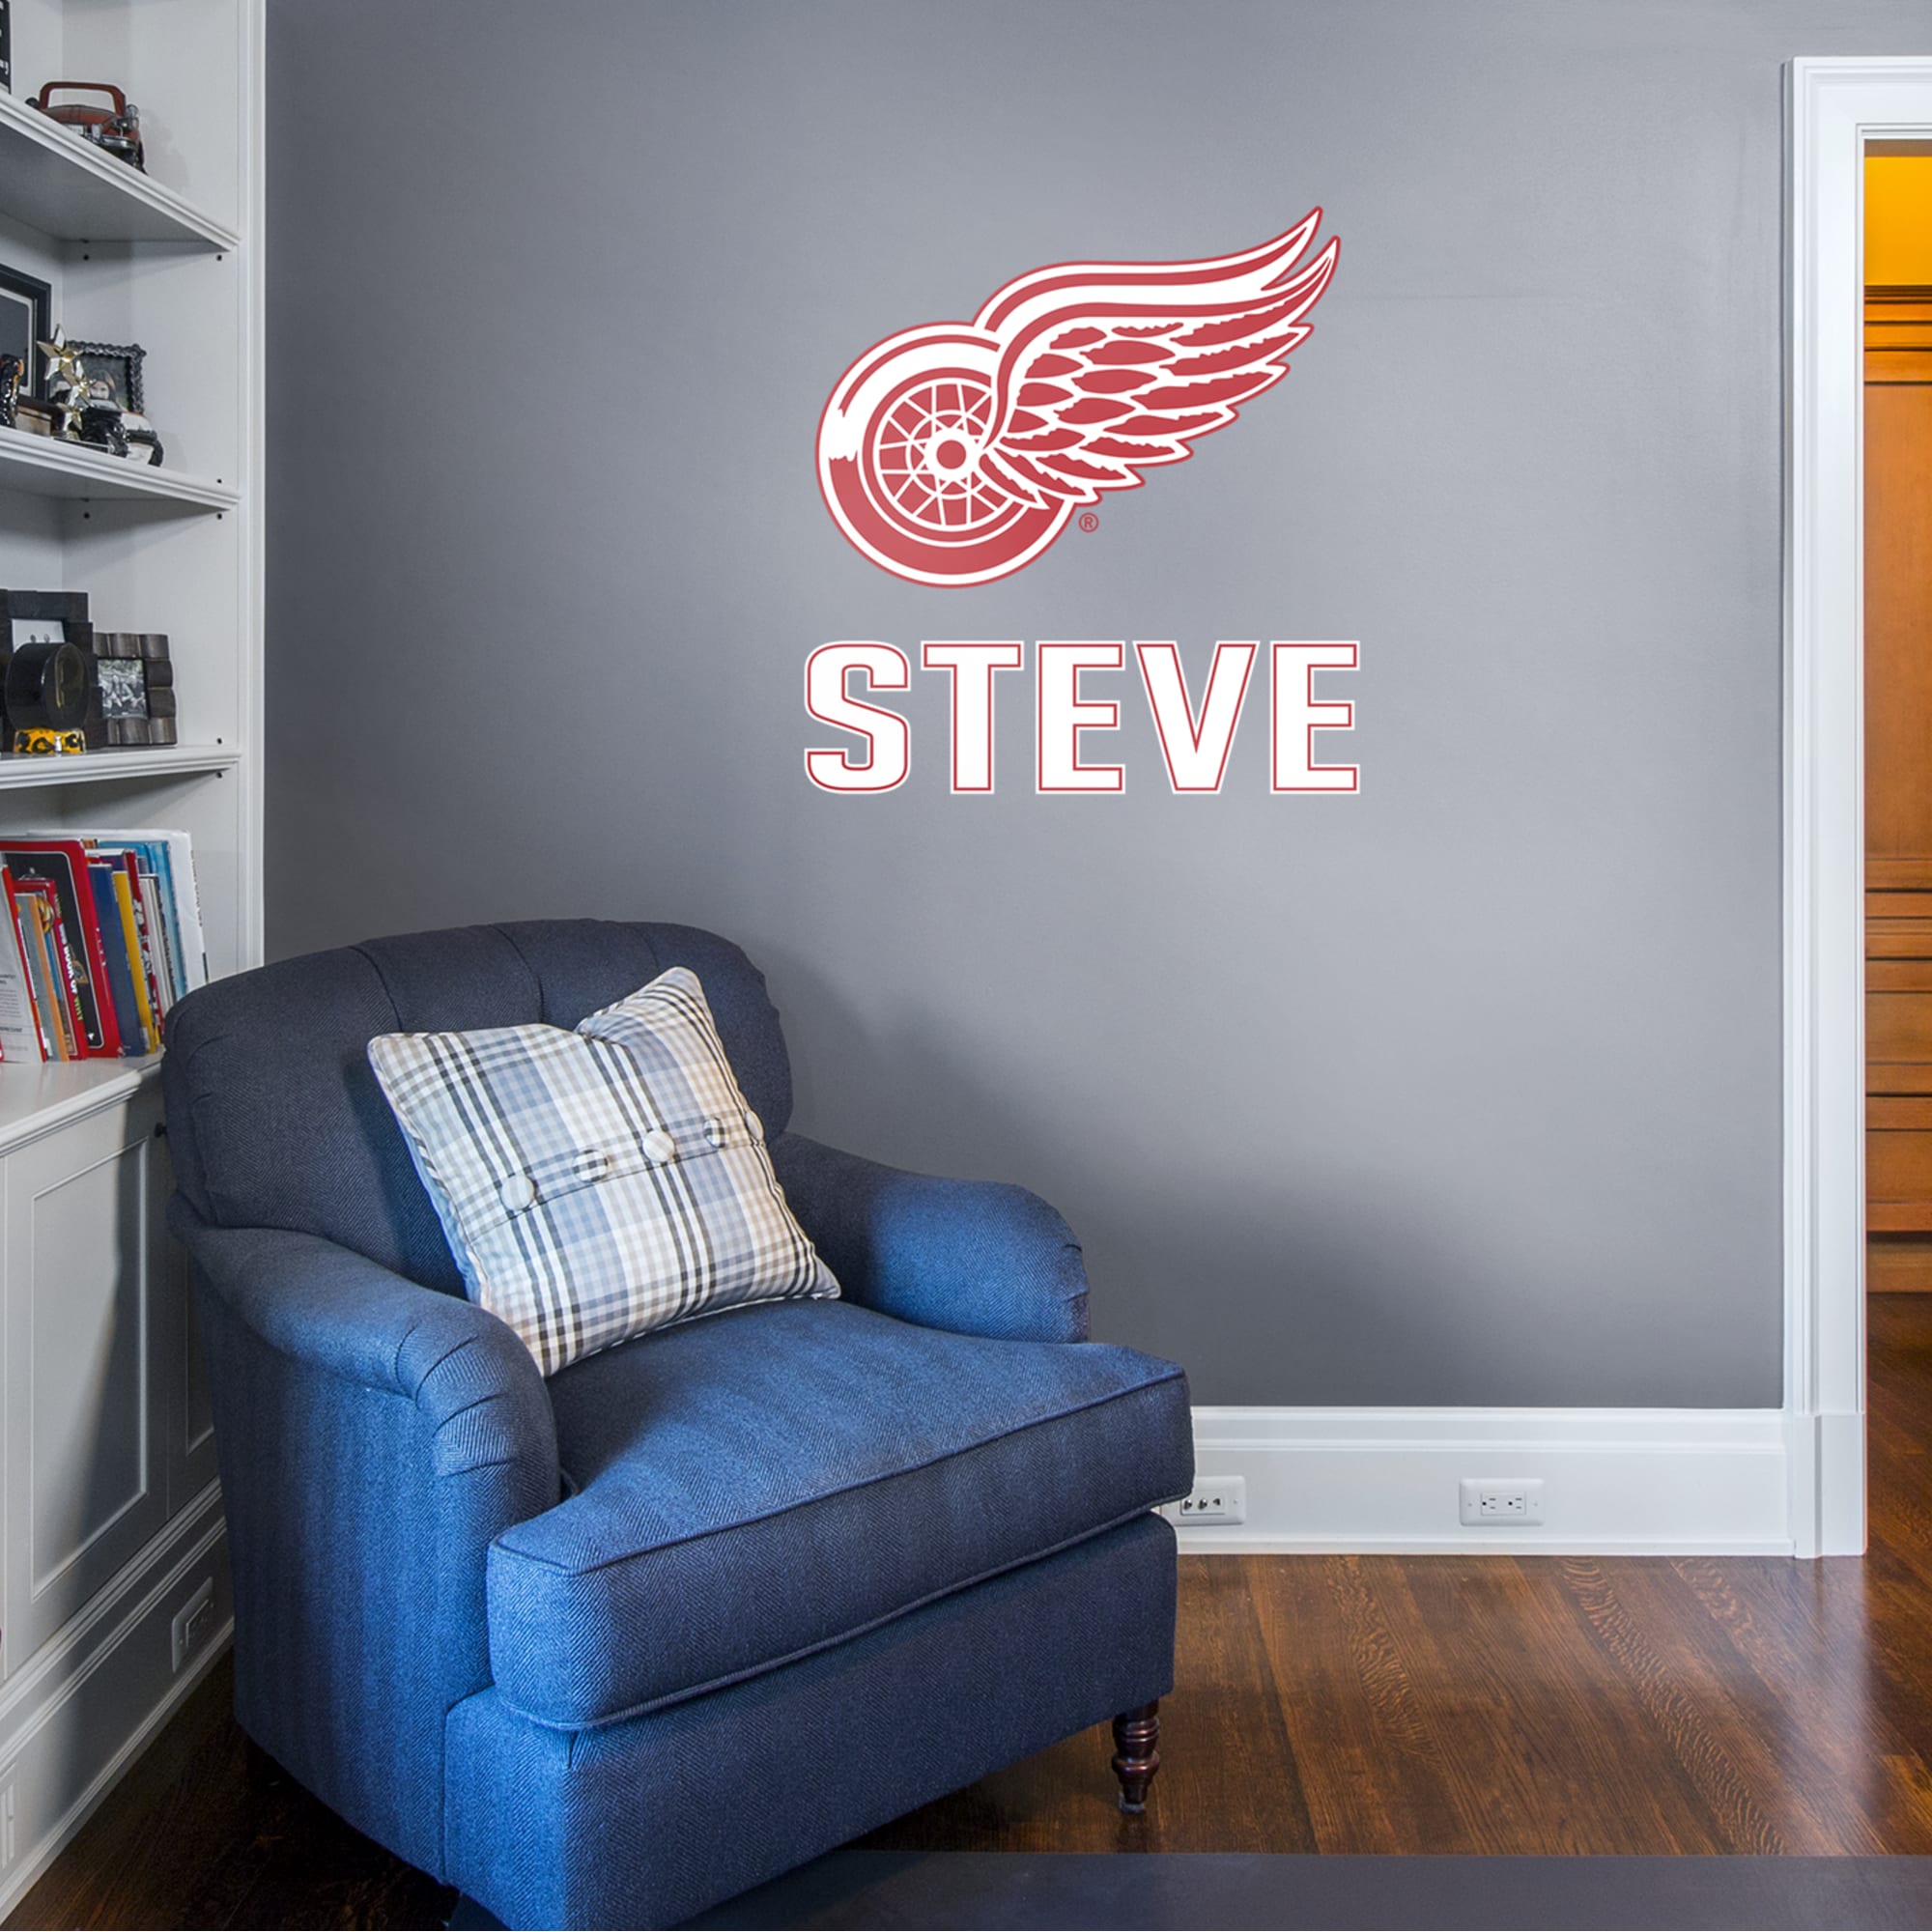 Detroit Red Wings Stacked Personalized Name - Officially Licensed NHL Transfer Decal in White (39.5"W x 52"H) by Fathead | Vinyl